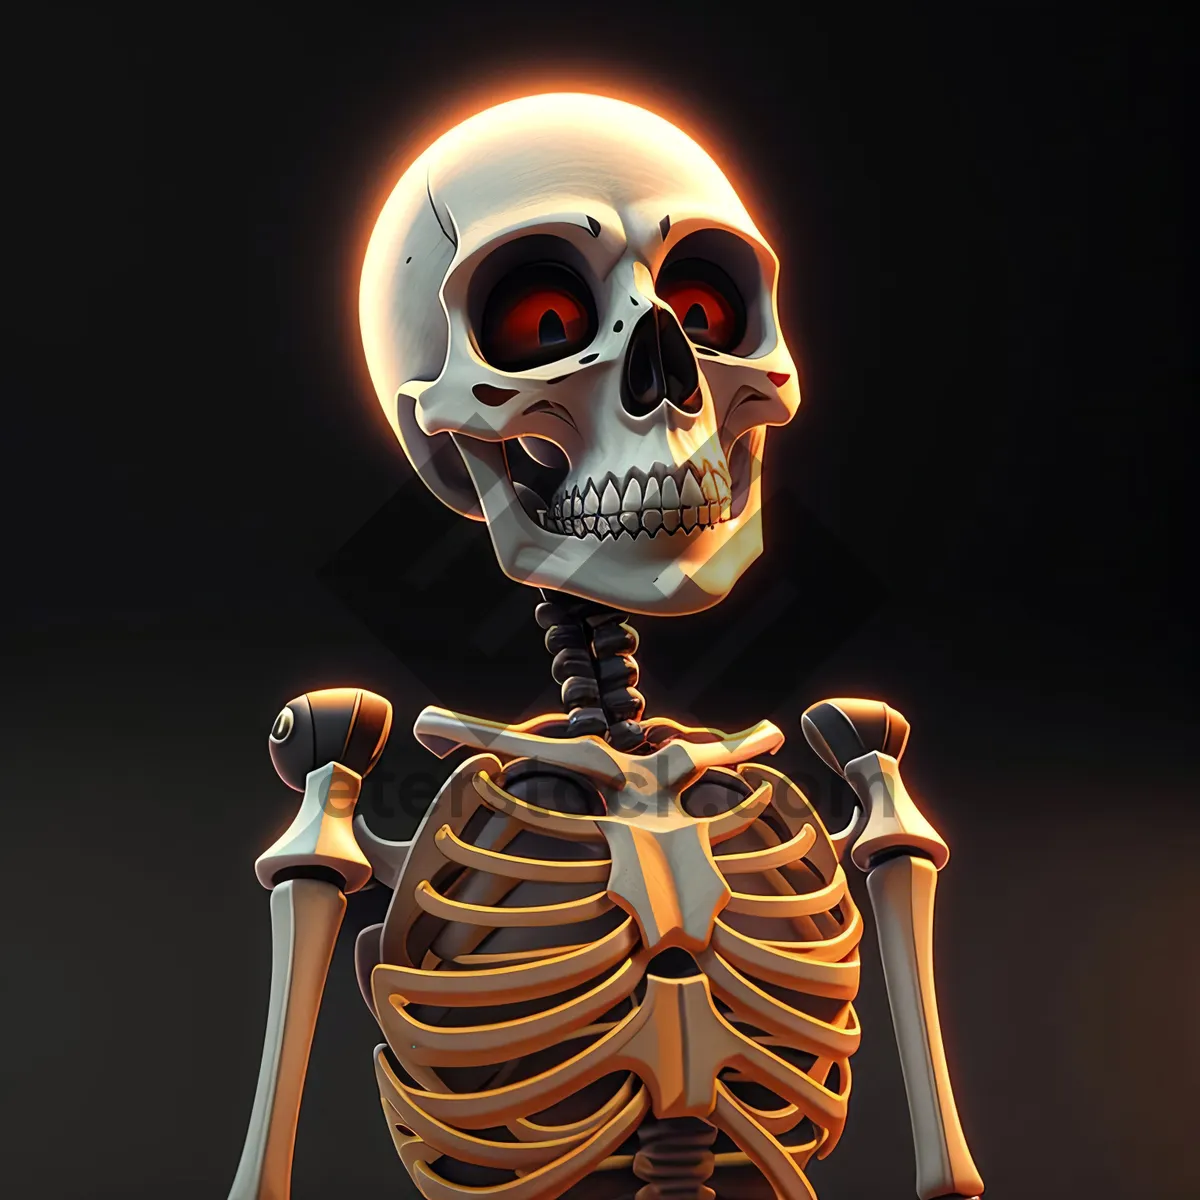 Picture of Spooky Skeletal Anatomy: Death's Anatomy in 3D